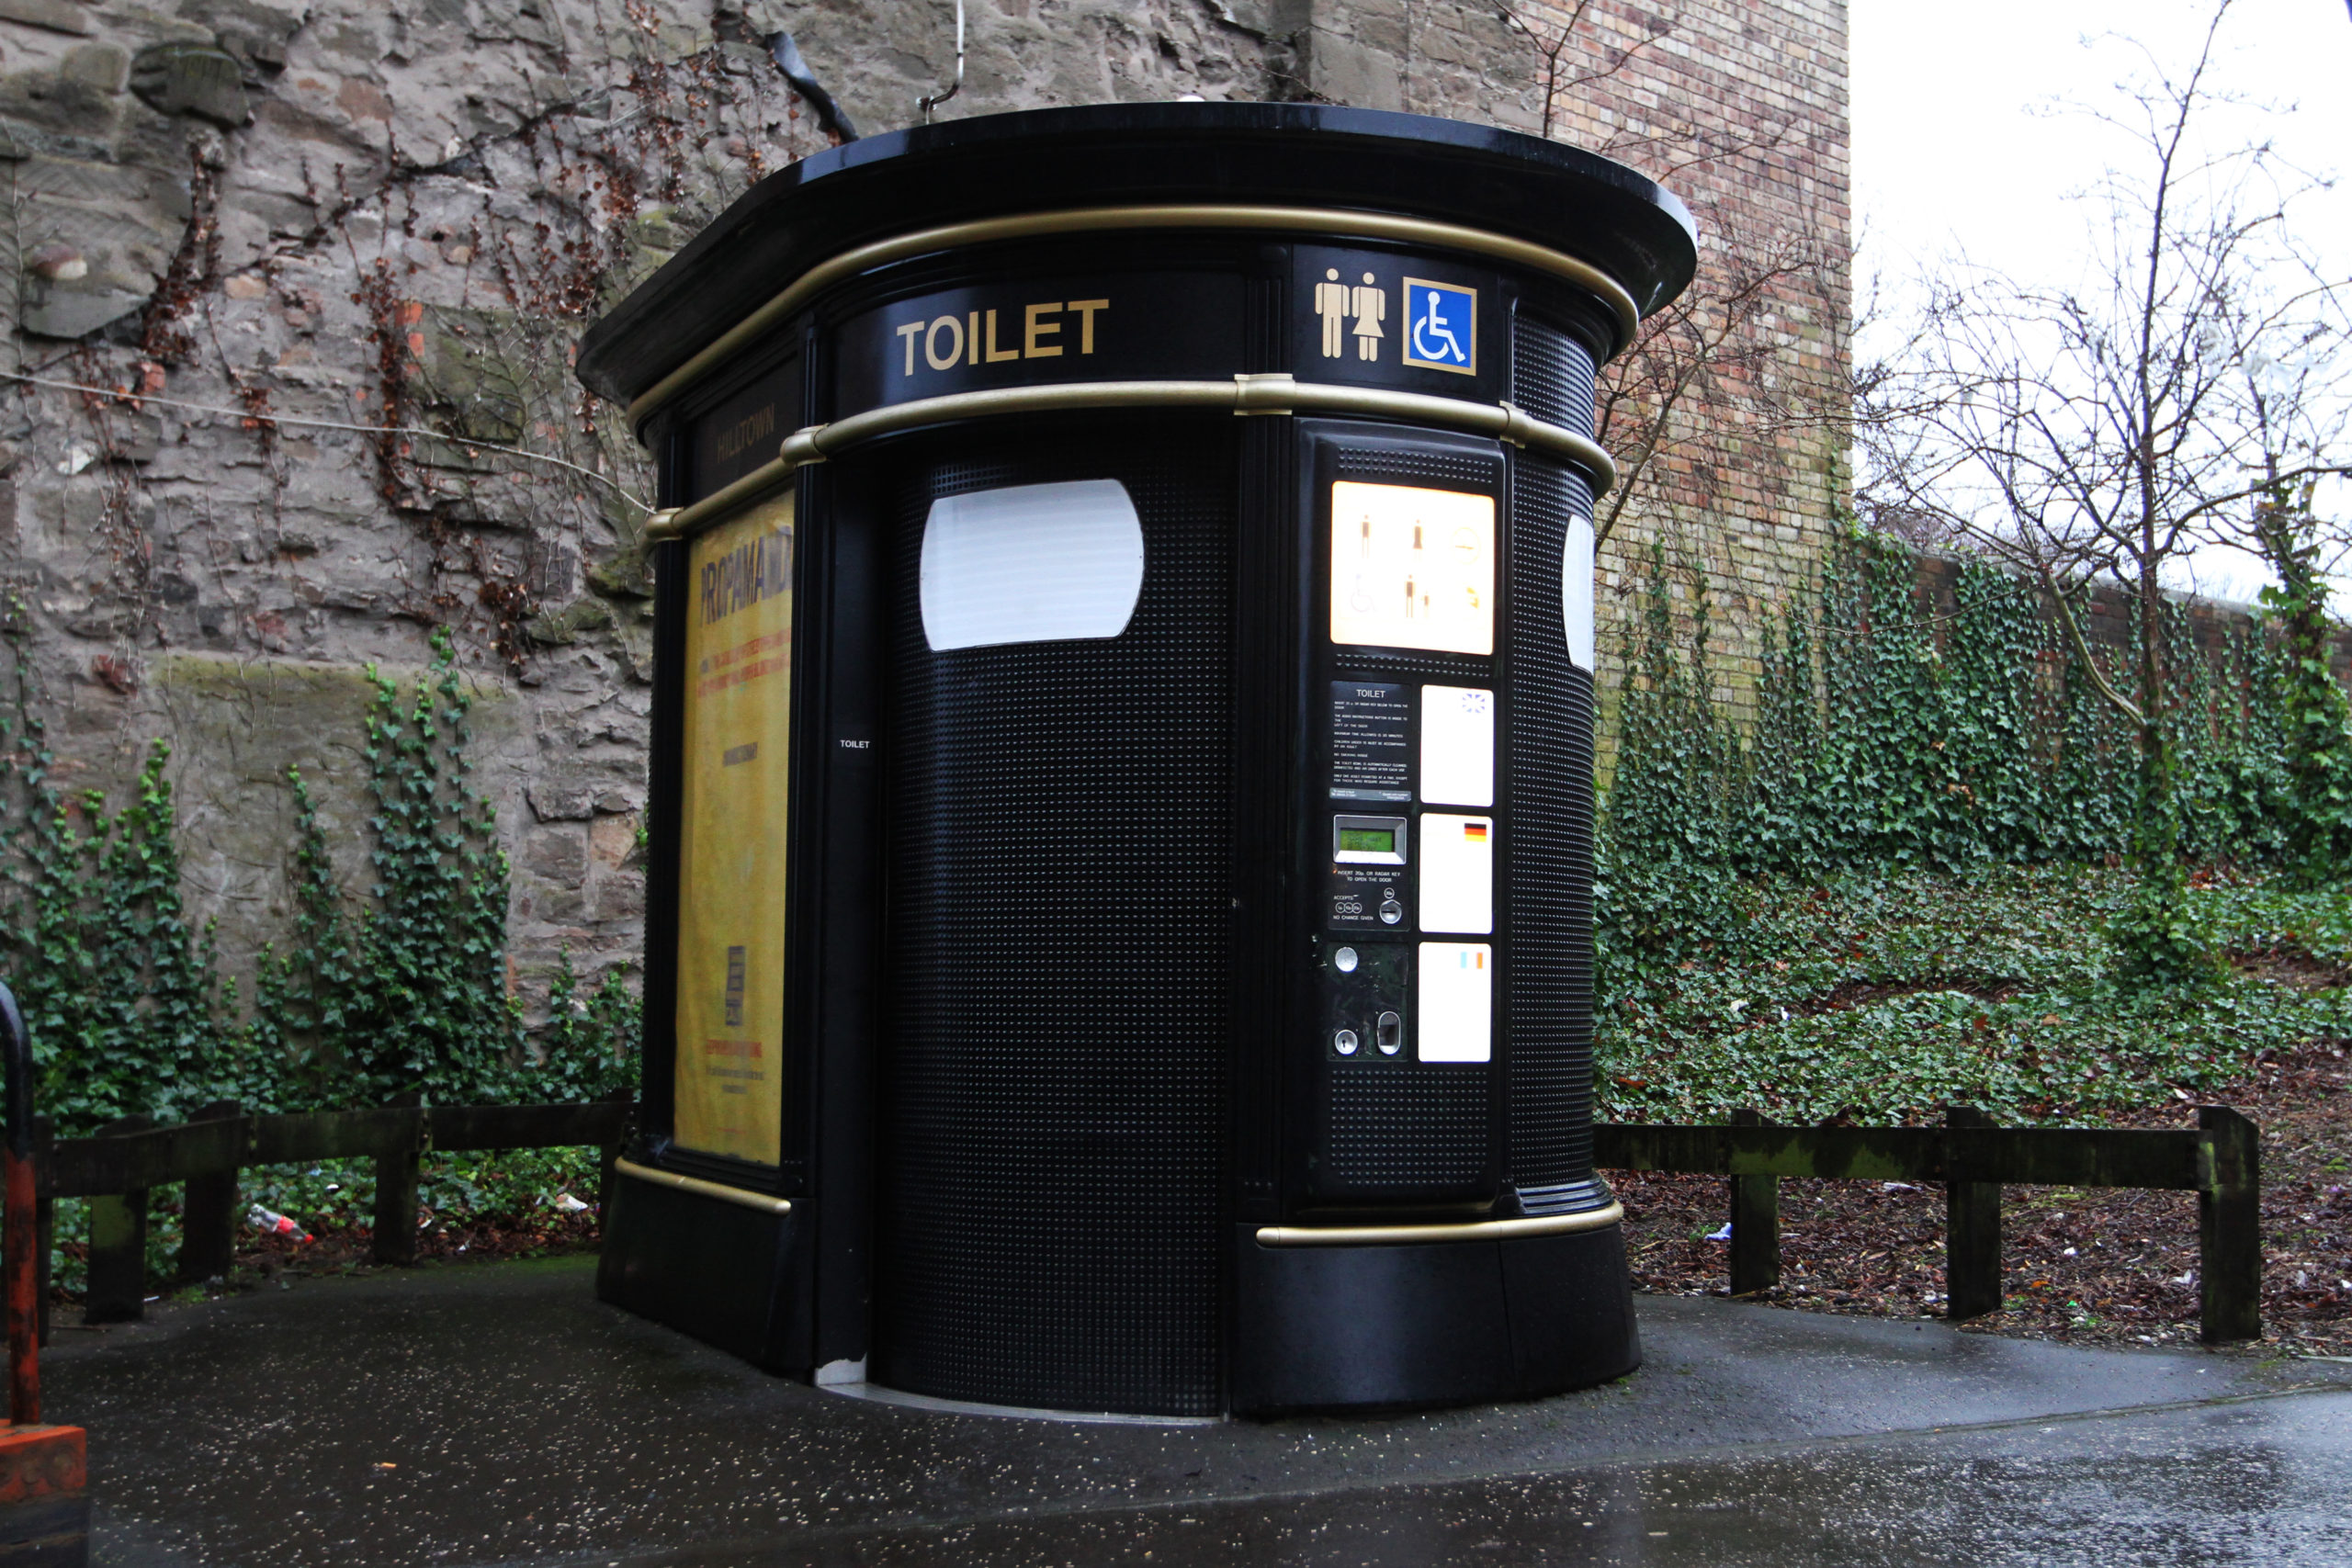 A public toilet in Dundee